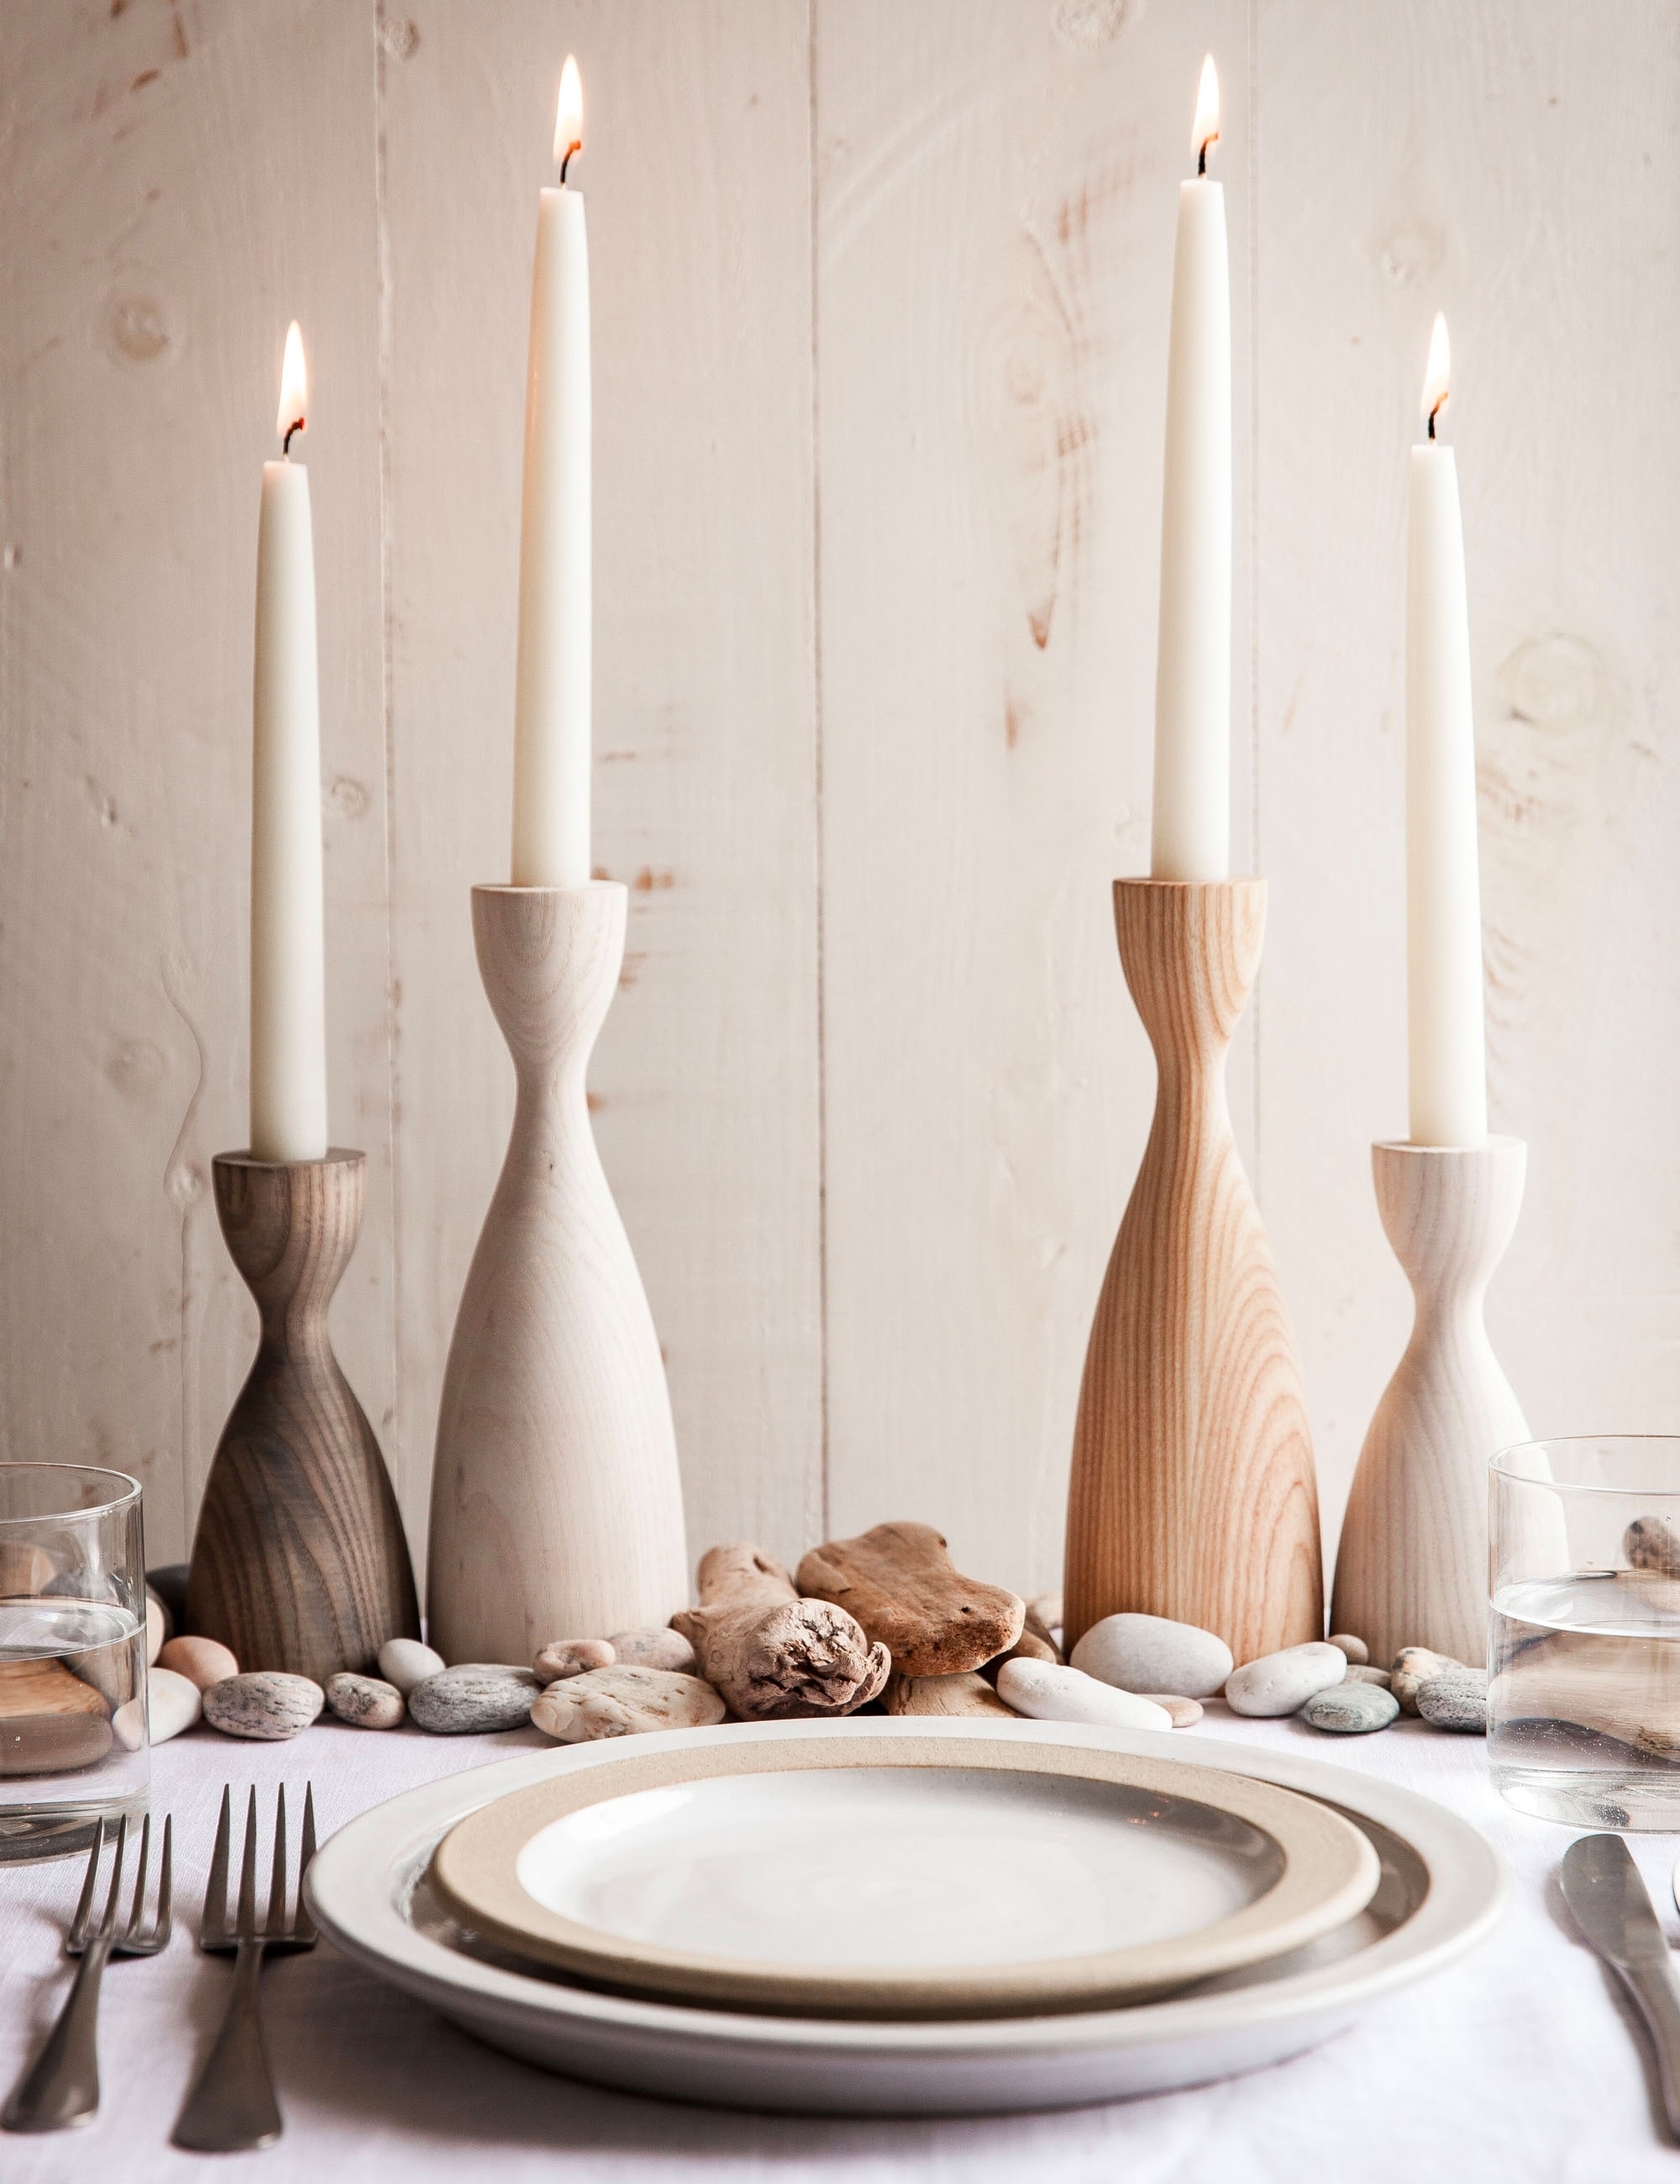 Pantry Candlestick by Farmhouse Pottery - Image 2